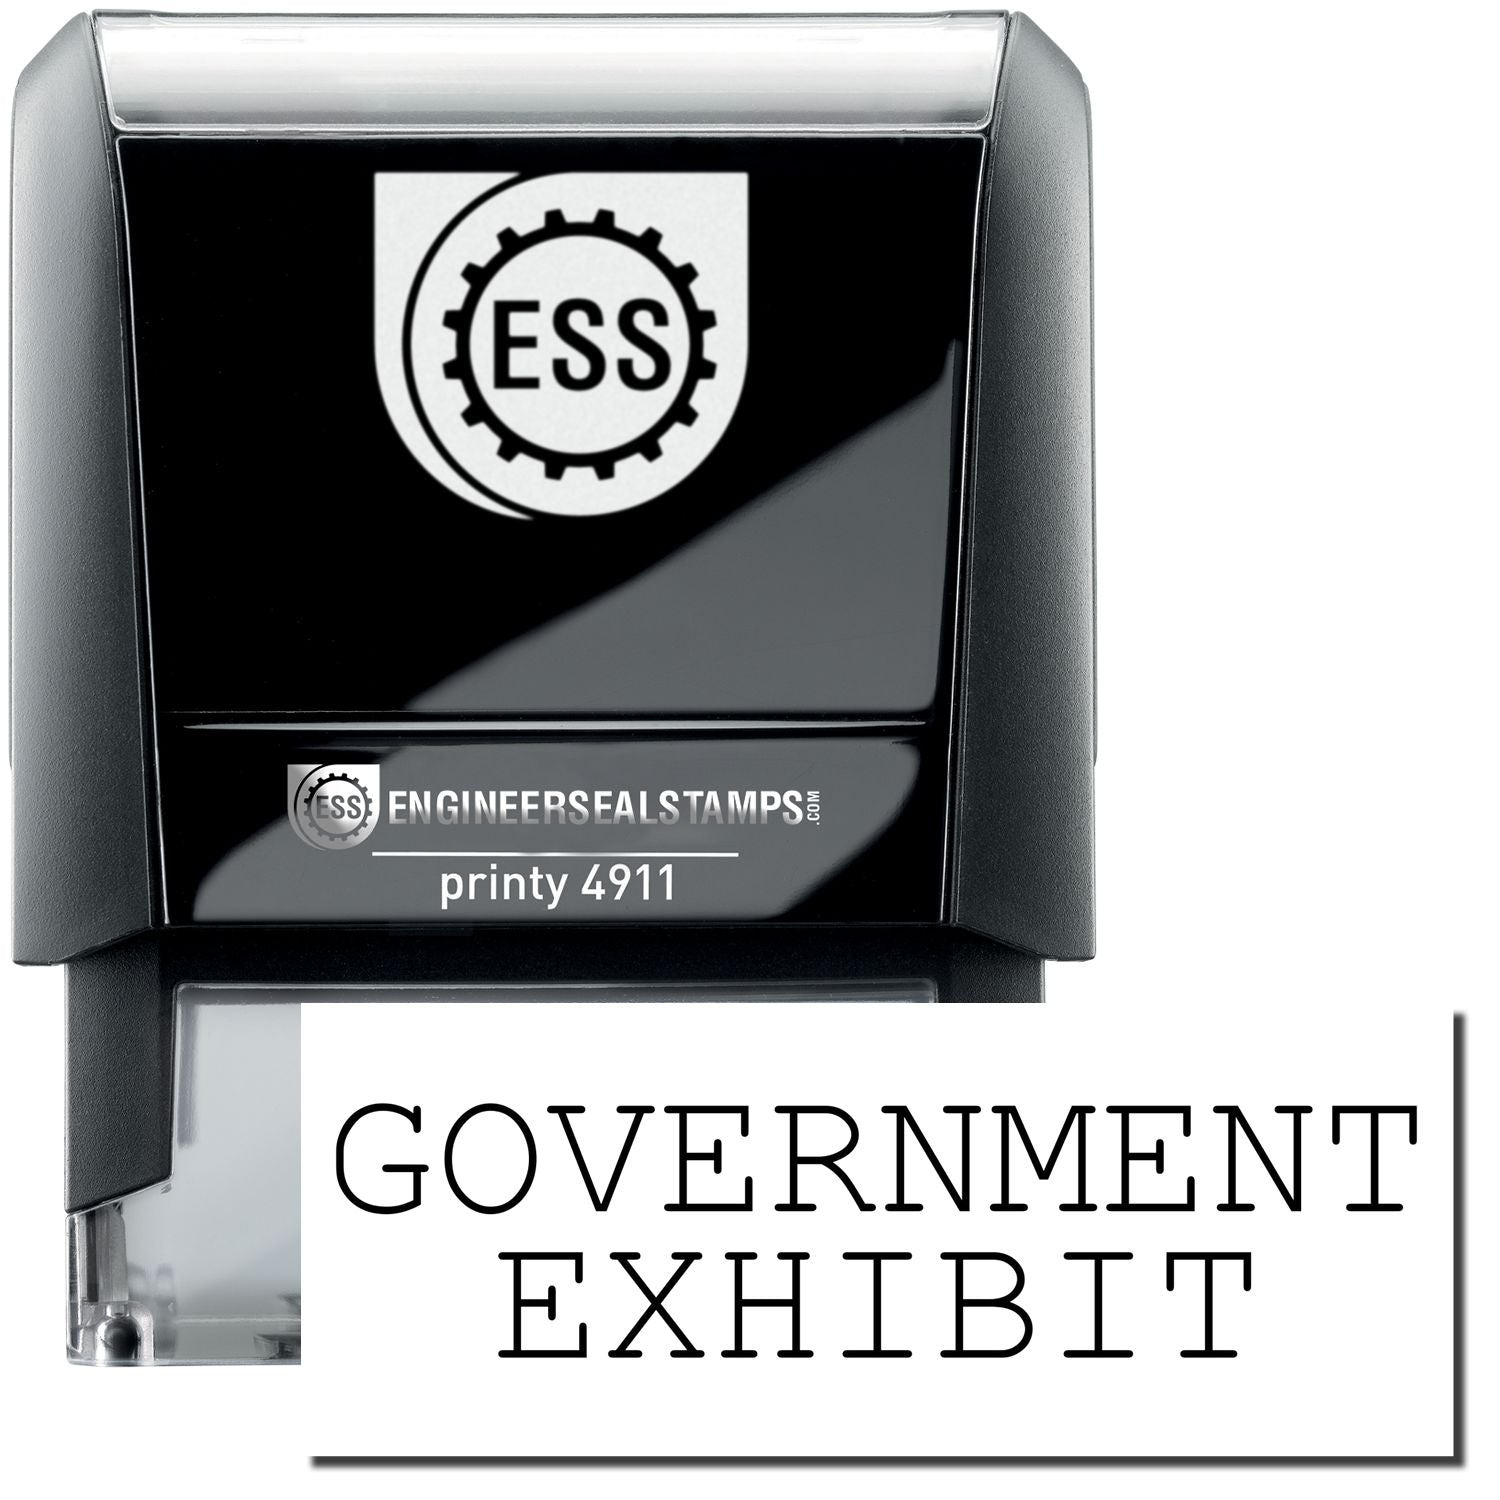 A self-inking stamp with a stamped image showing how the text "GOVERNMENT EXHIBIT" is displayed after stamping.